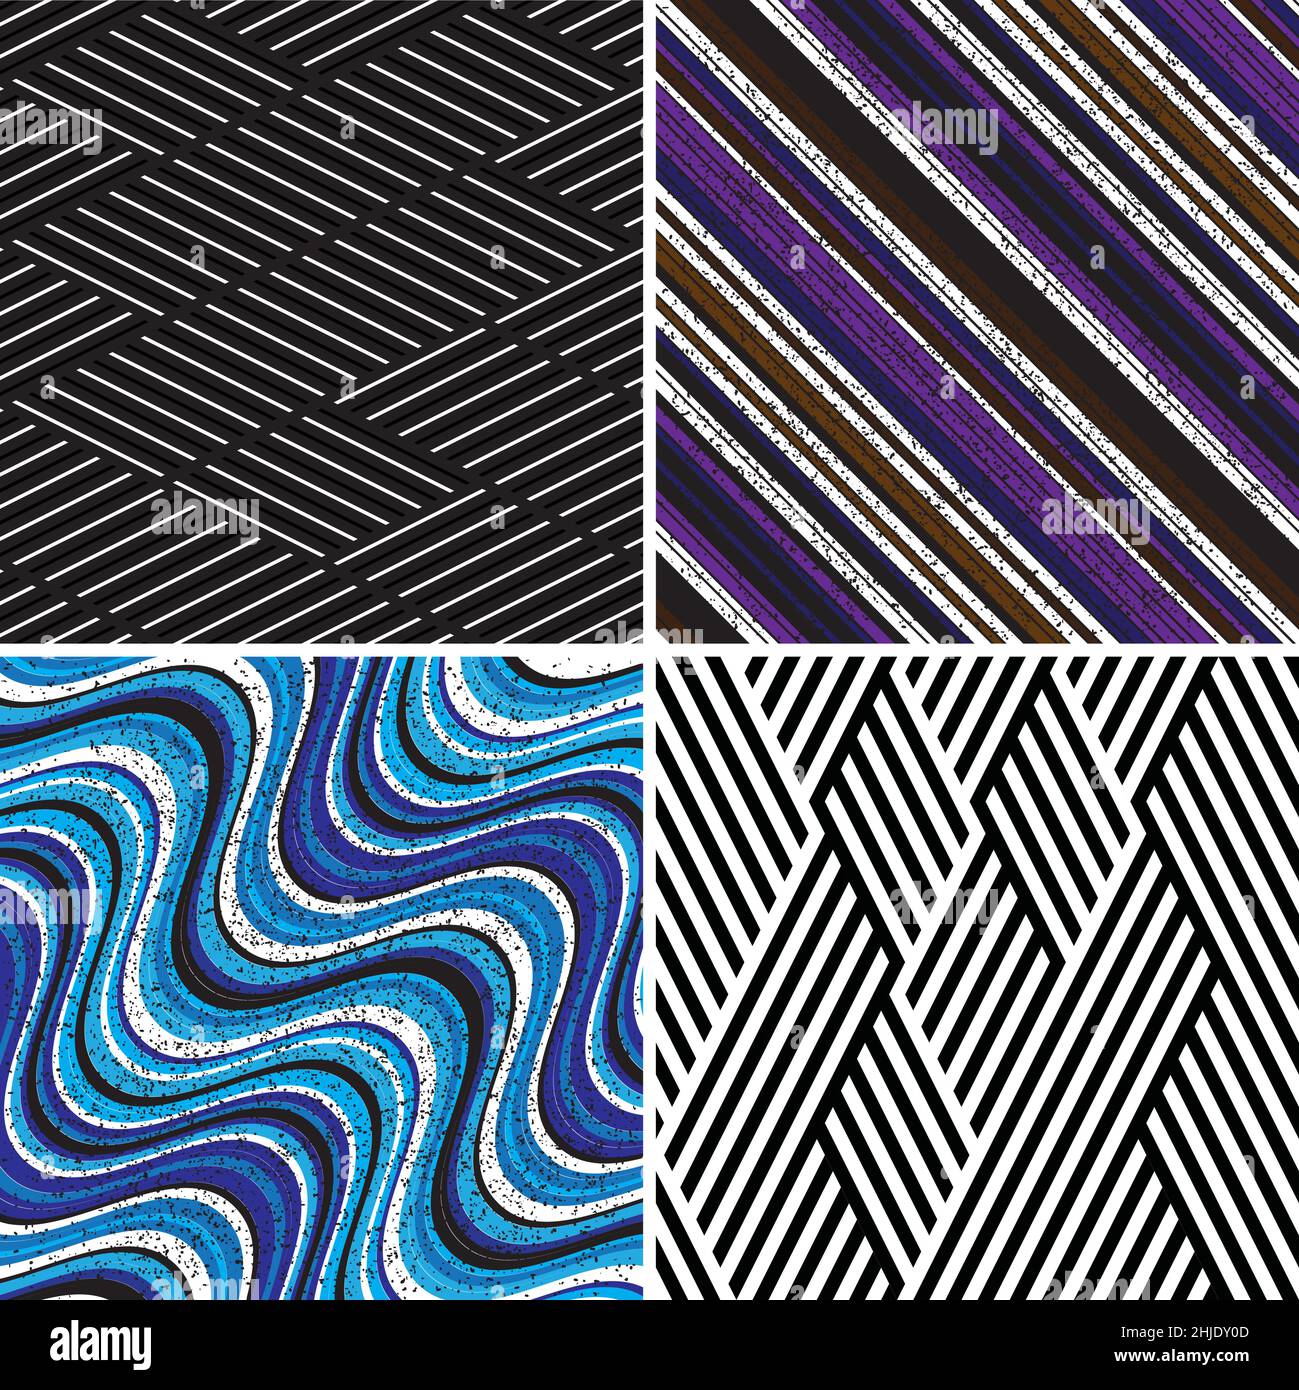 6 different vector patterns in the same package(eps). One pattern is paid and 5 are free (white dividing lines) Stock Vector